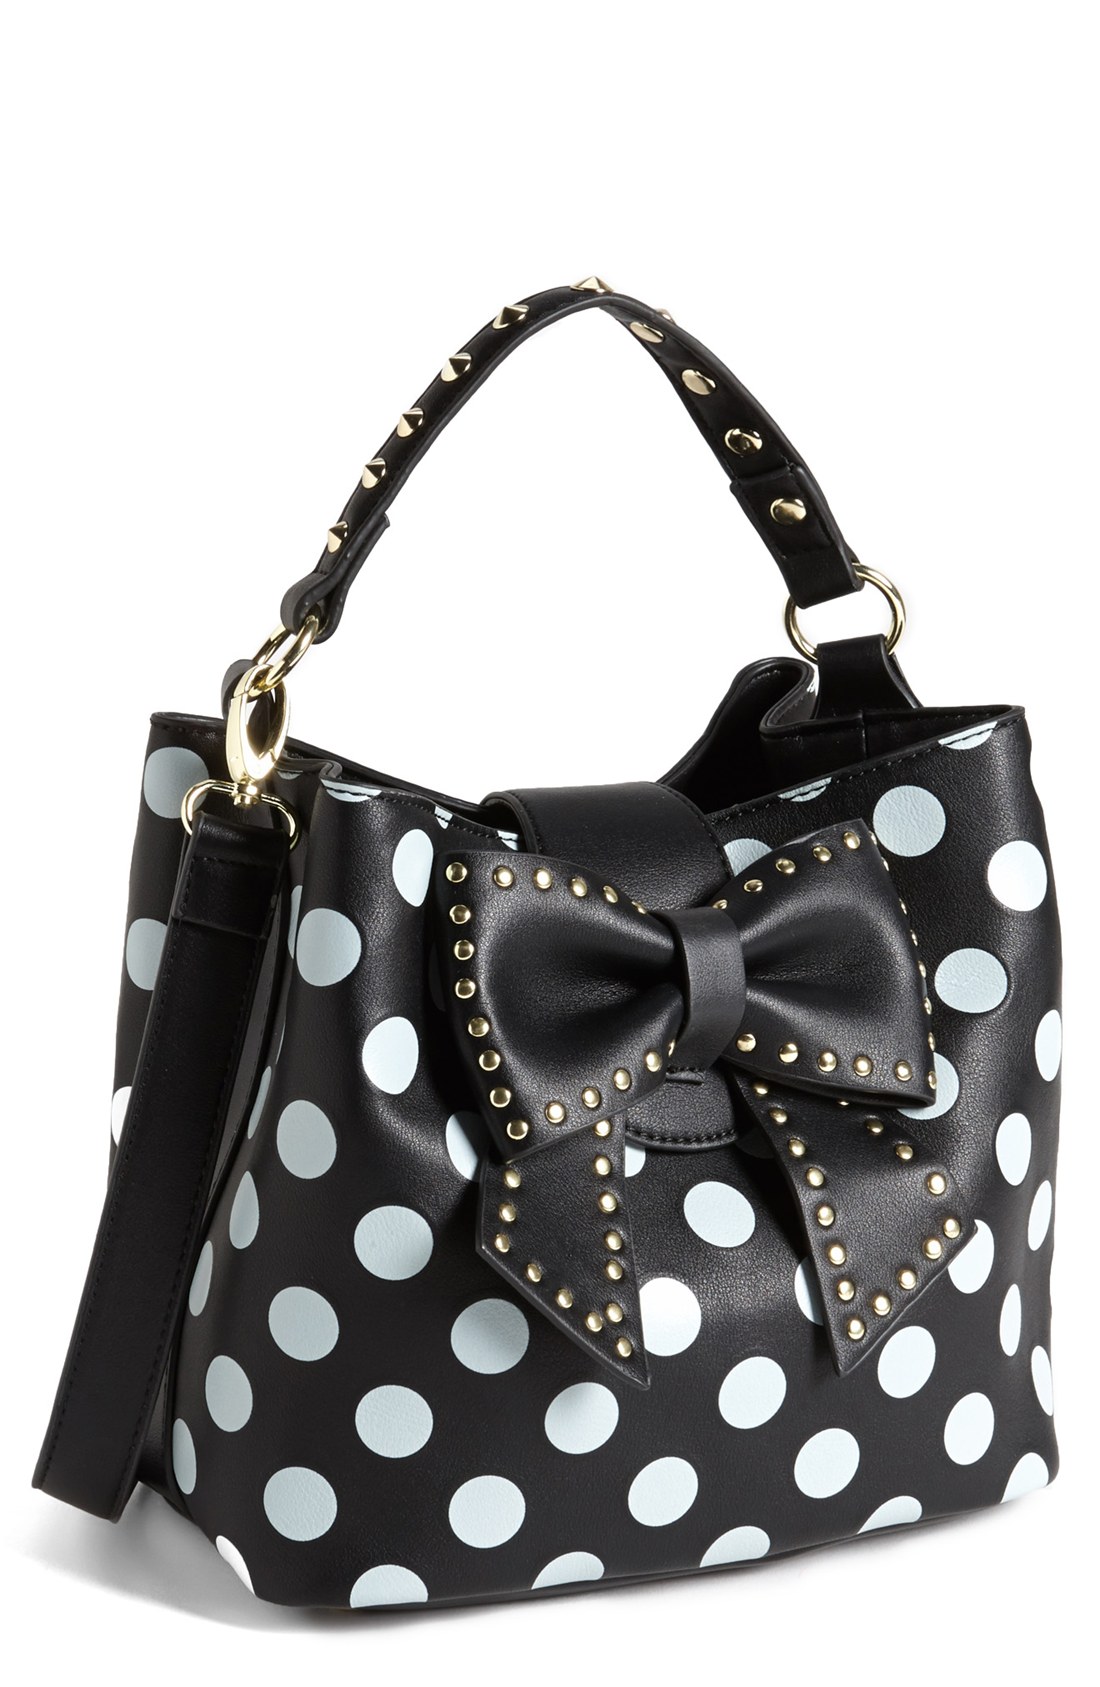 Betsey Johnson Polka Dot Luggage. Betsey Johnson Heart Quilted Bow ...